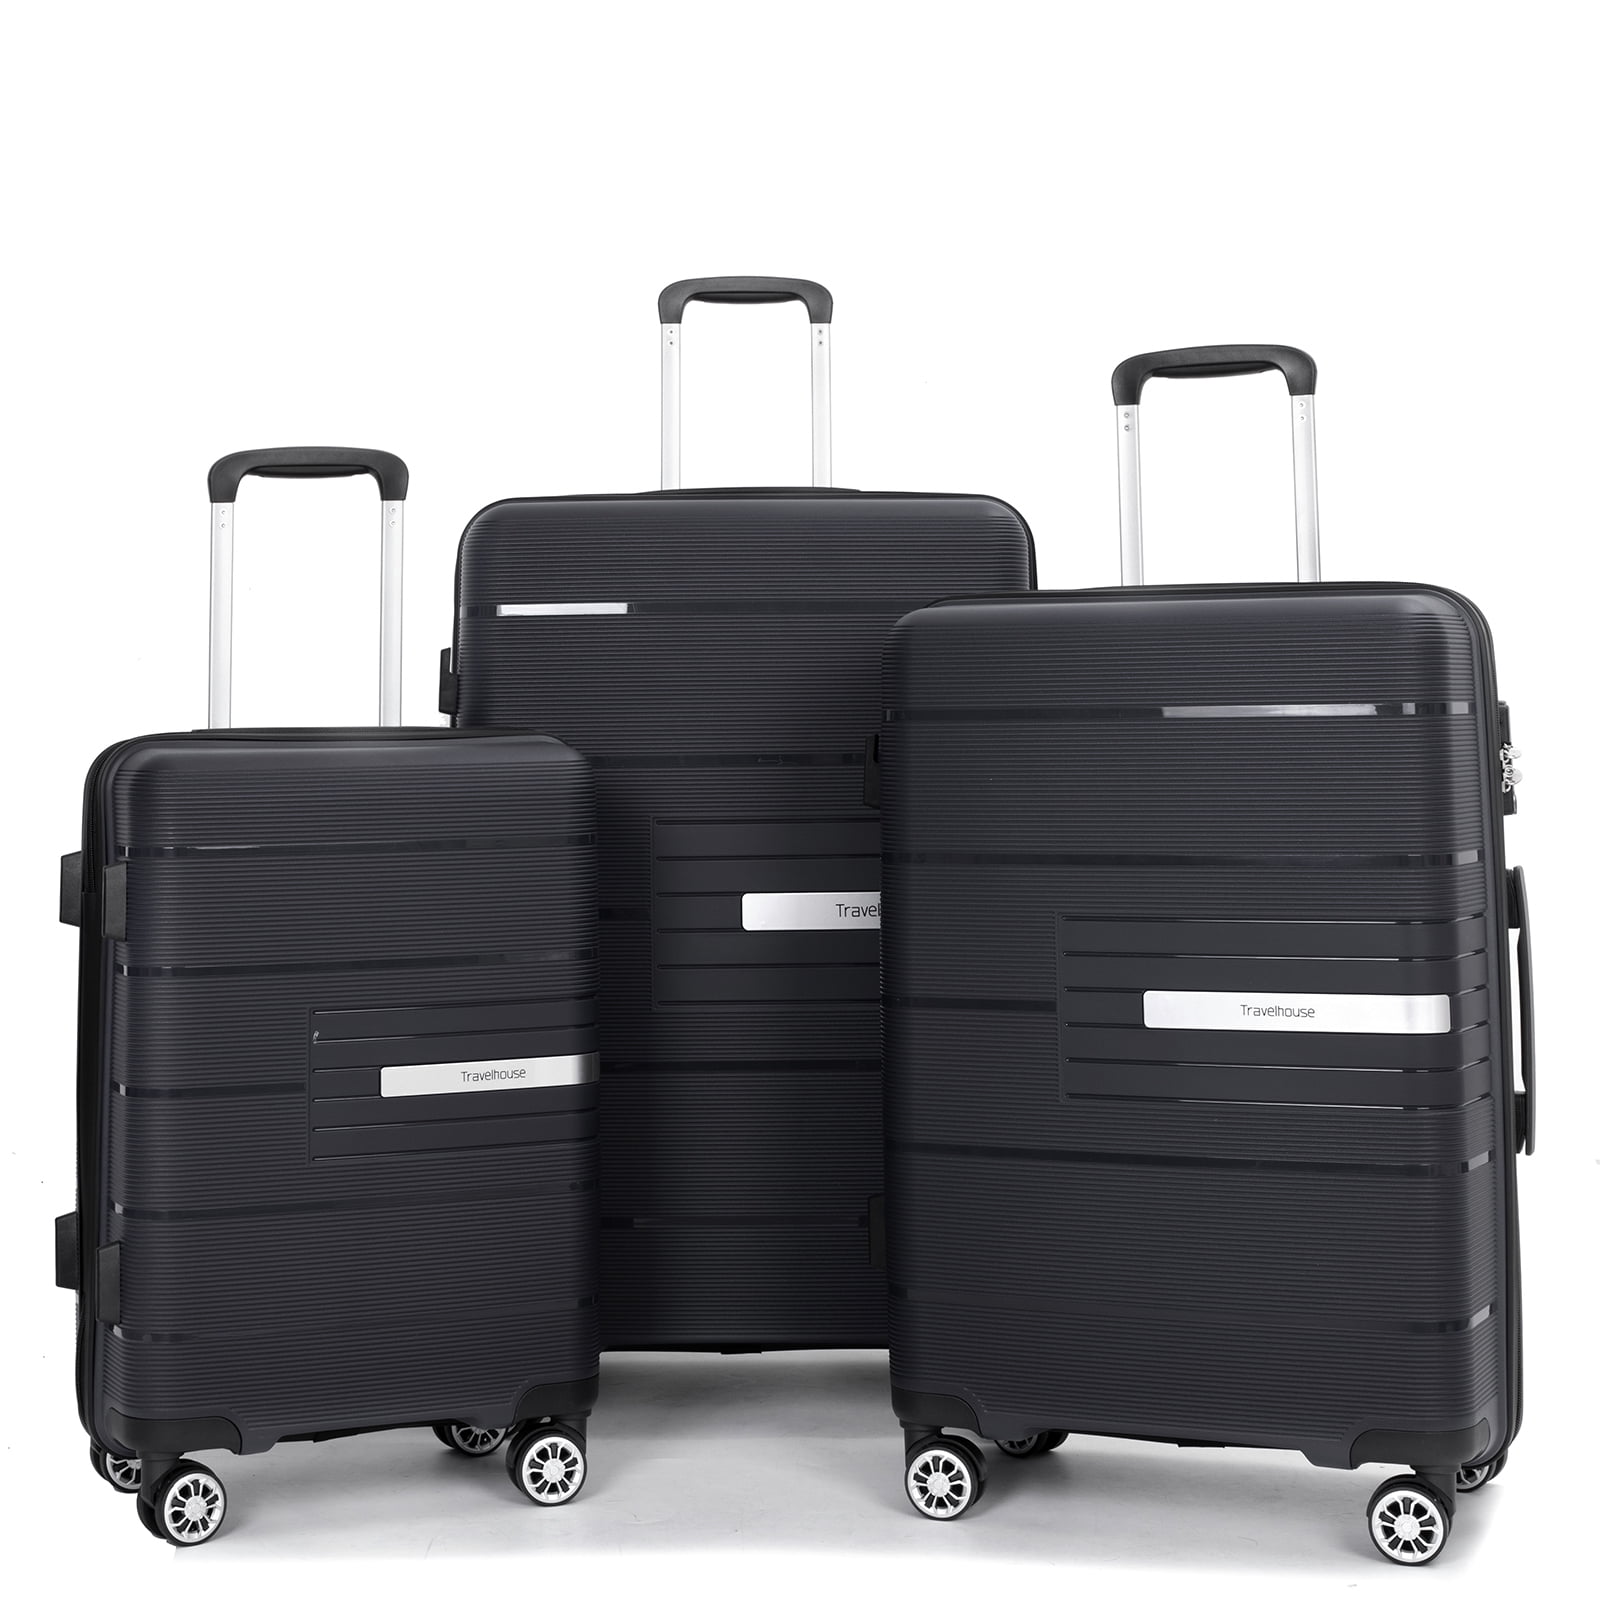 Tripcomp 3 Piece Luggage Sets, Hardside Carry On Luggage, PP case with ...